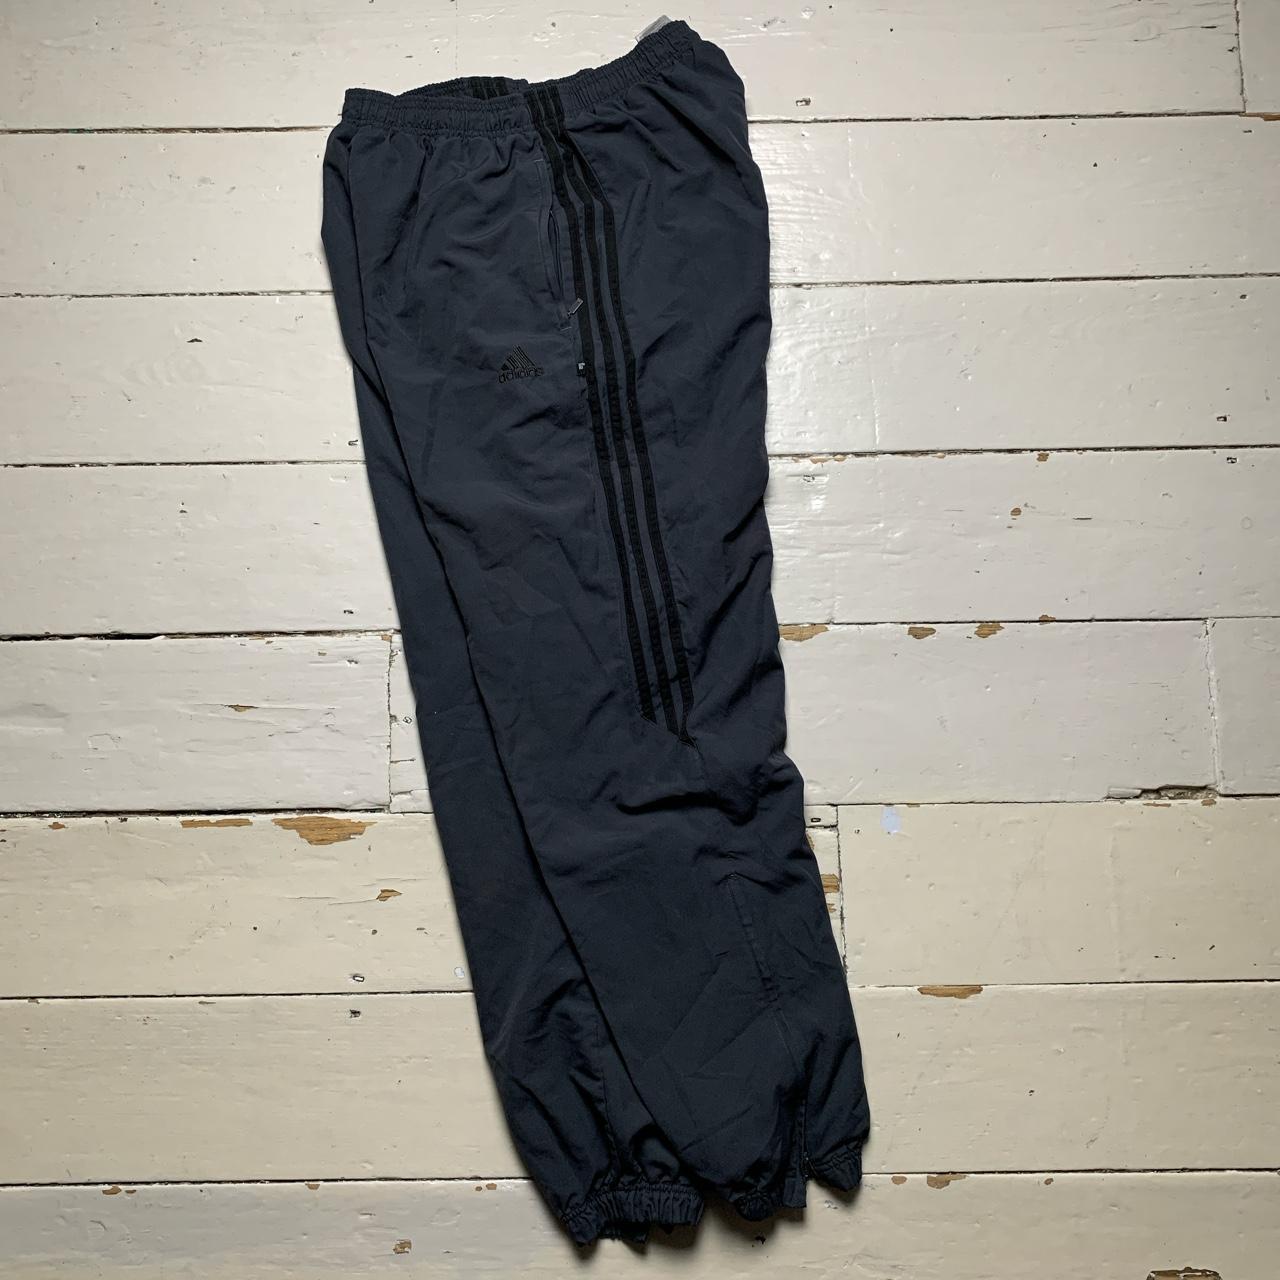 Adidas Baggy Shell Bottoms Grey and Black Stripes